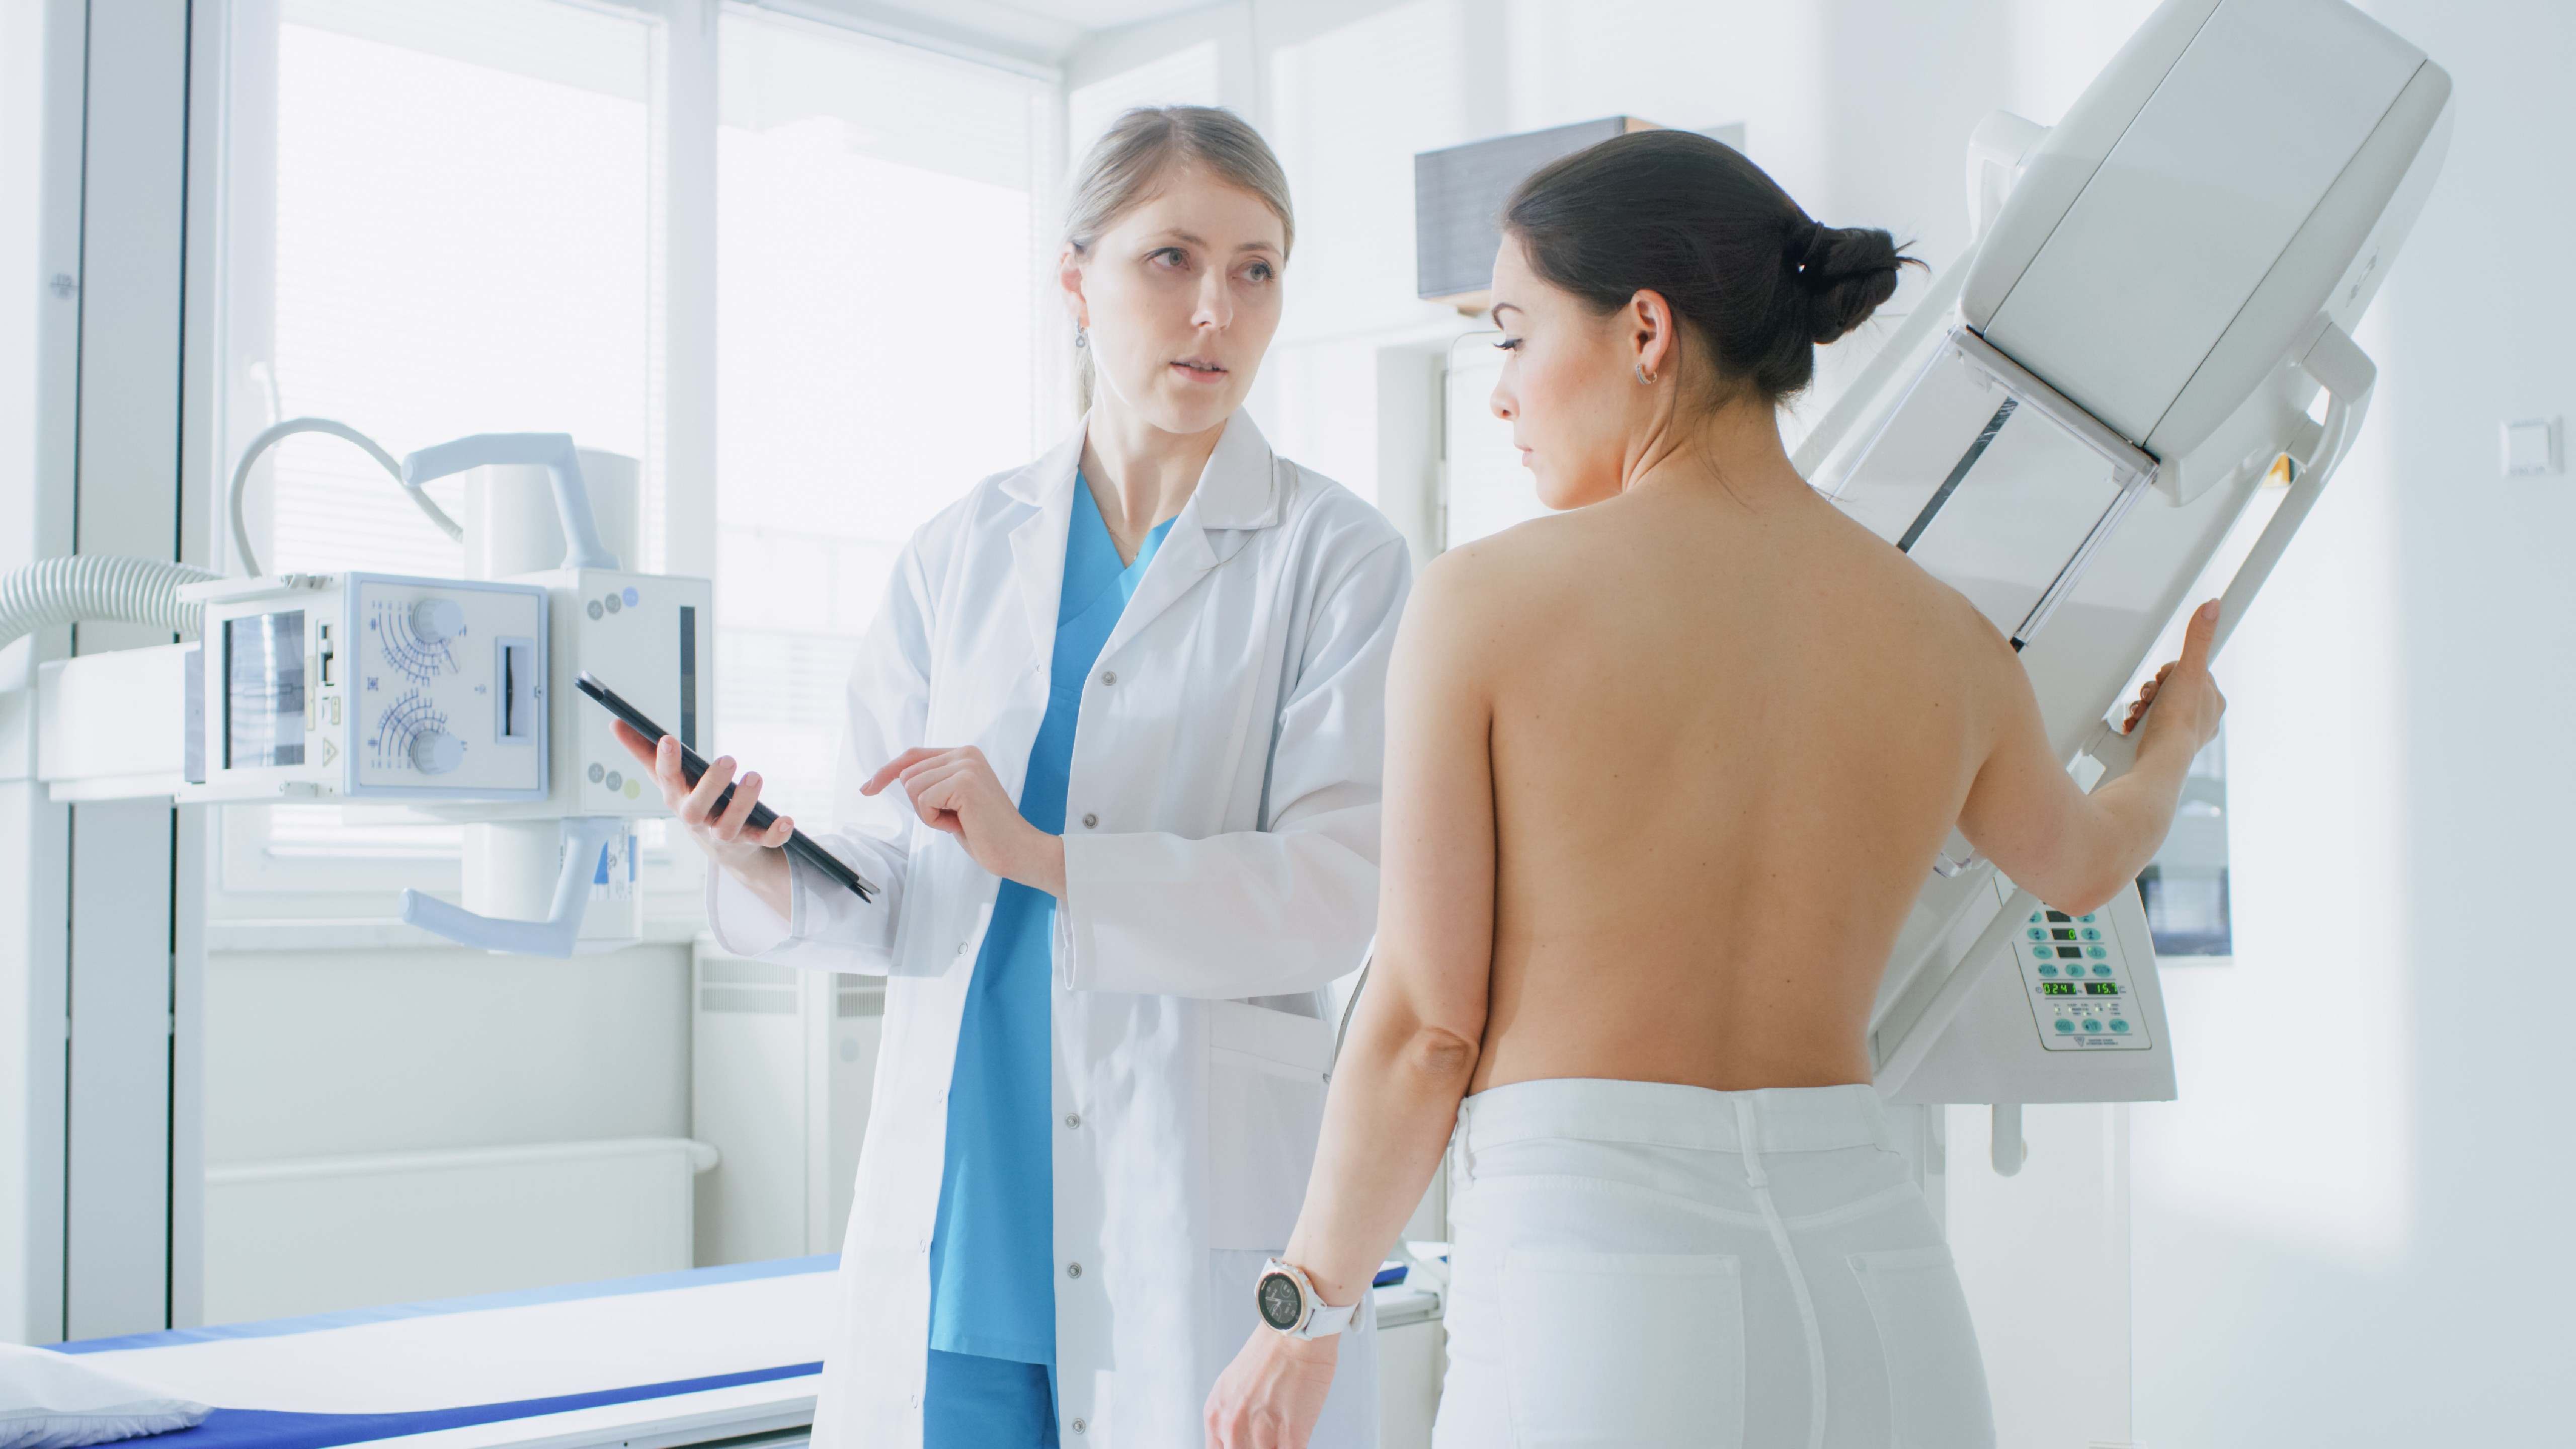 In the Hospital, Female Patient Listens to Mammography Technologist / Doctor Uses Tablet Computer, Explains Importance of Breast Cancer Prevention. Mammography Procedure.